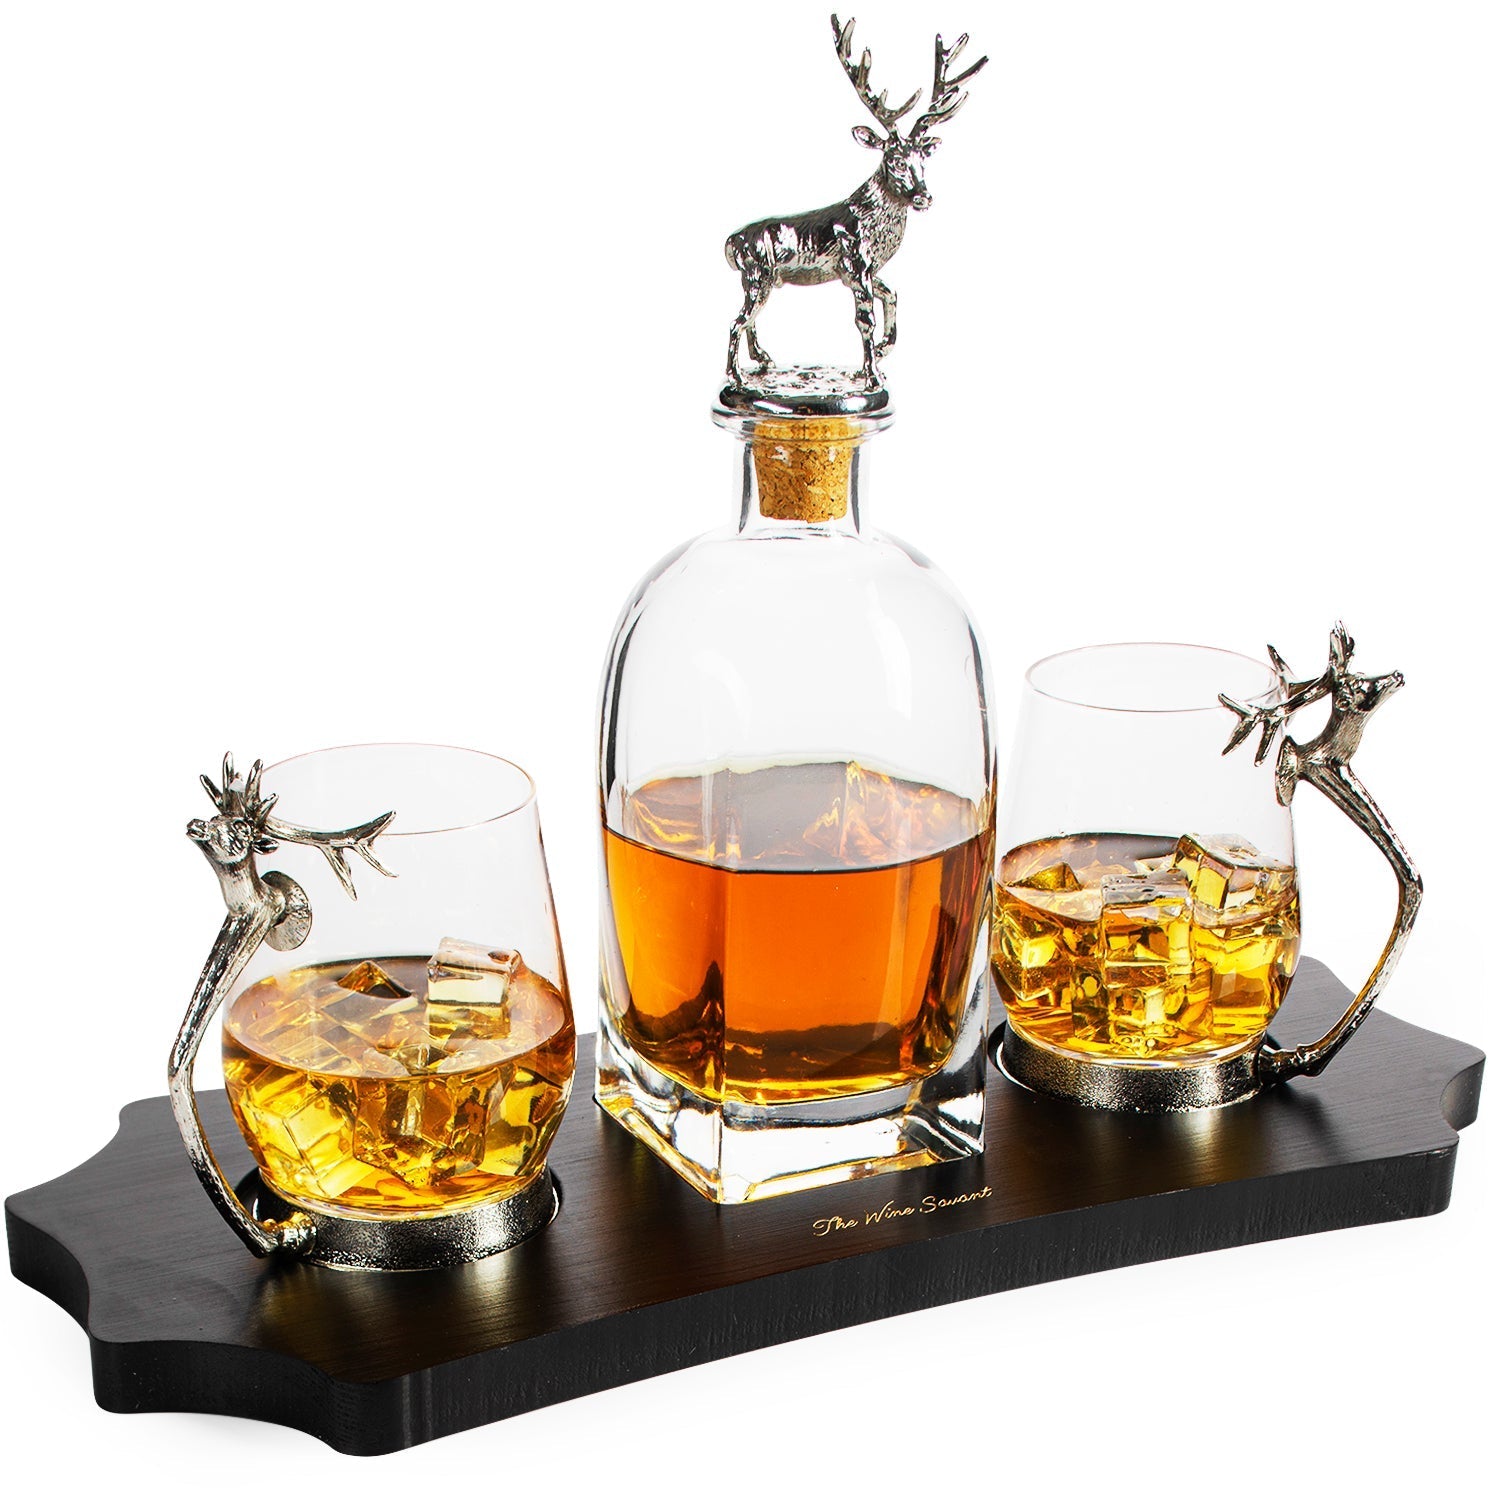 Stag Antler Decanter Set with 2 Stag Glasses - Antique Pewter Whiskey Decanter Set Elegant Liquor Decanter Gift Set for Bar by The Wine Savant - Luxury Decanter for Bourbon, Scotch, or Whiskey 750ml-4